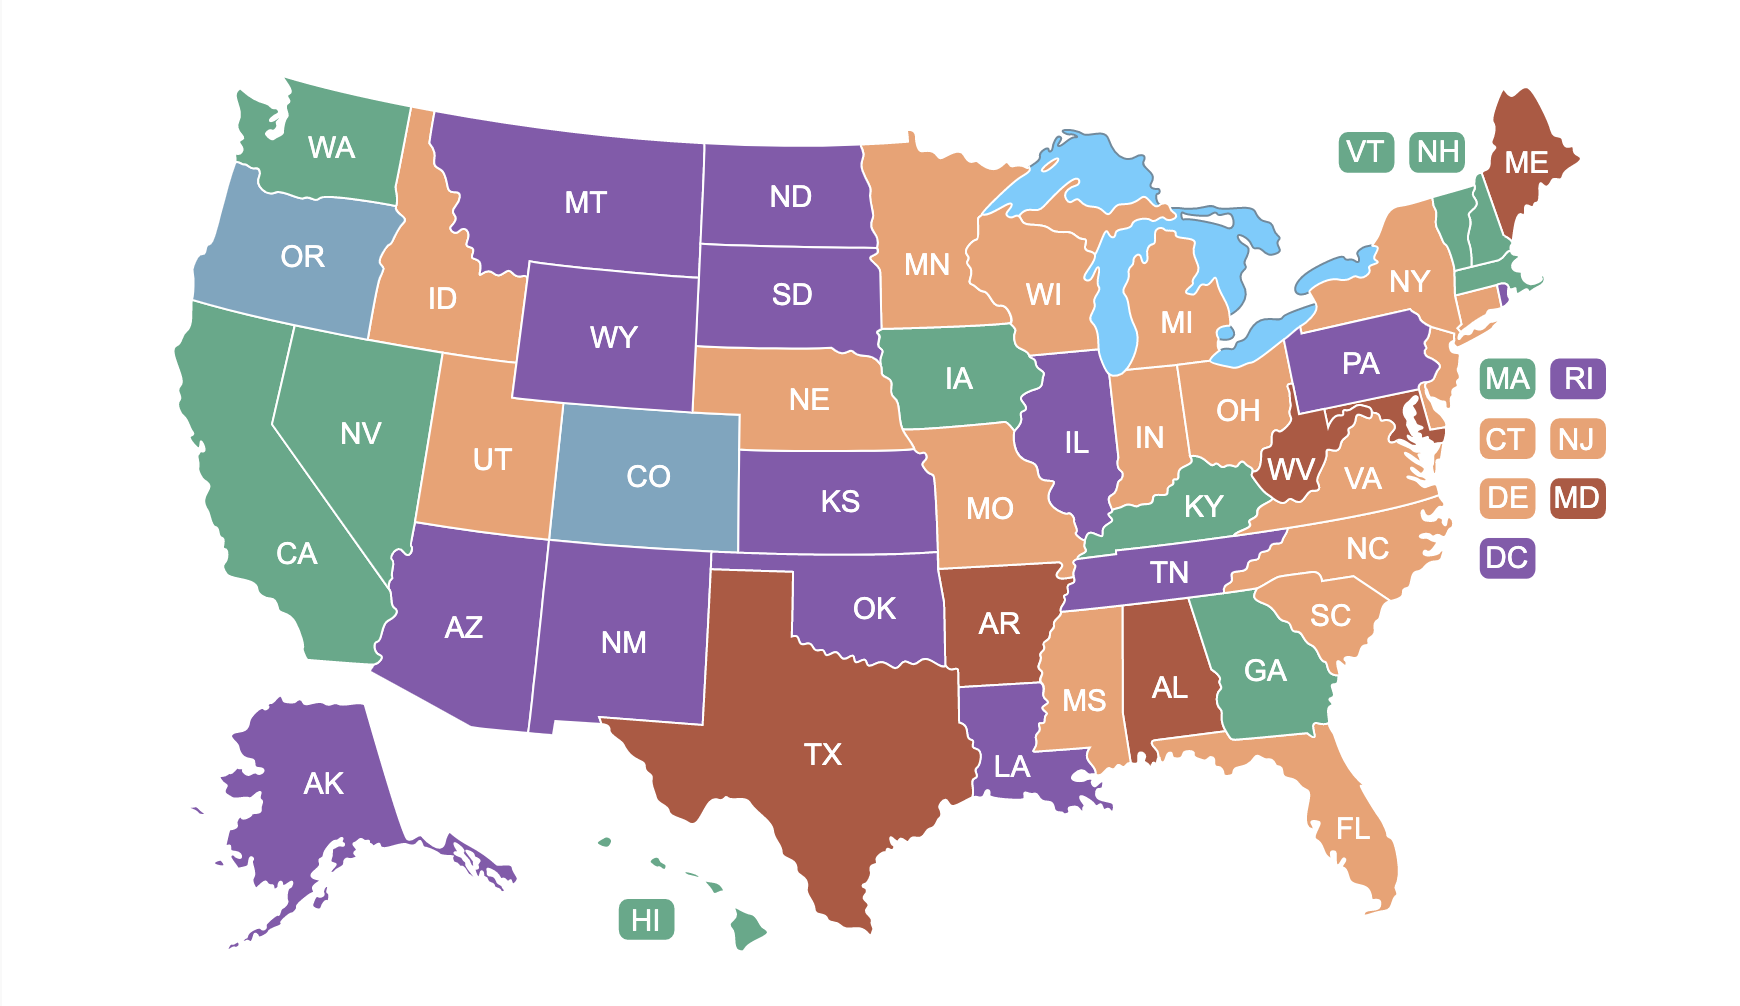 Reminder: We Have an Interactive Map of the Work Comp Rules in the United States!